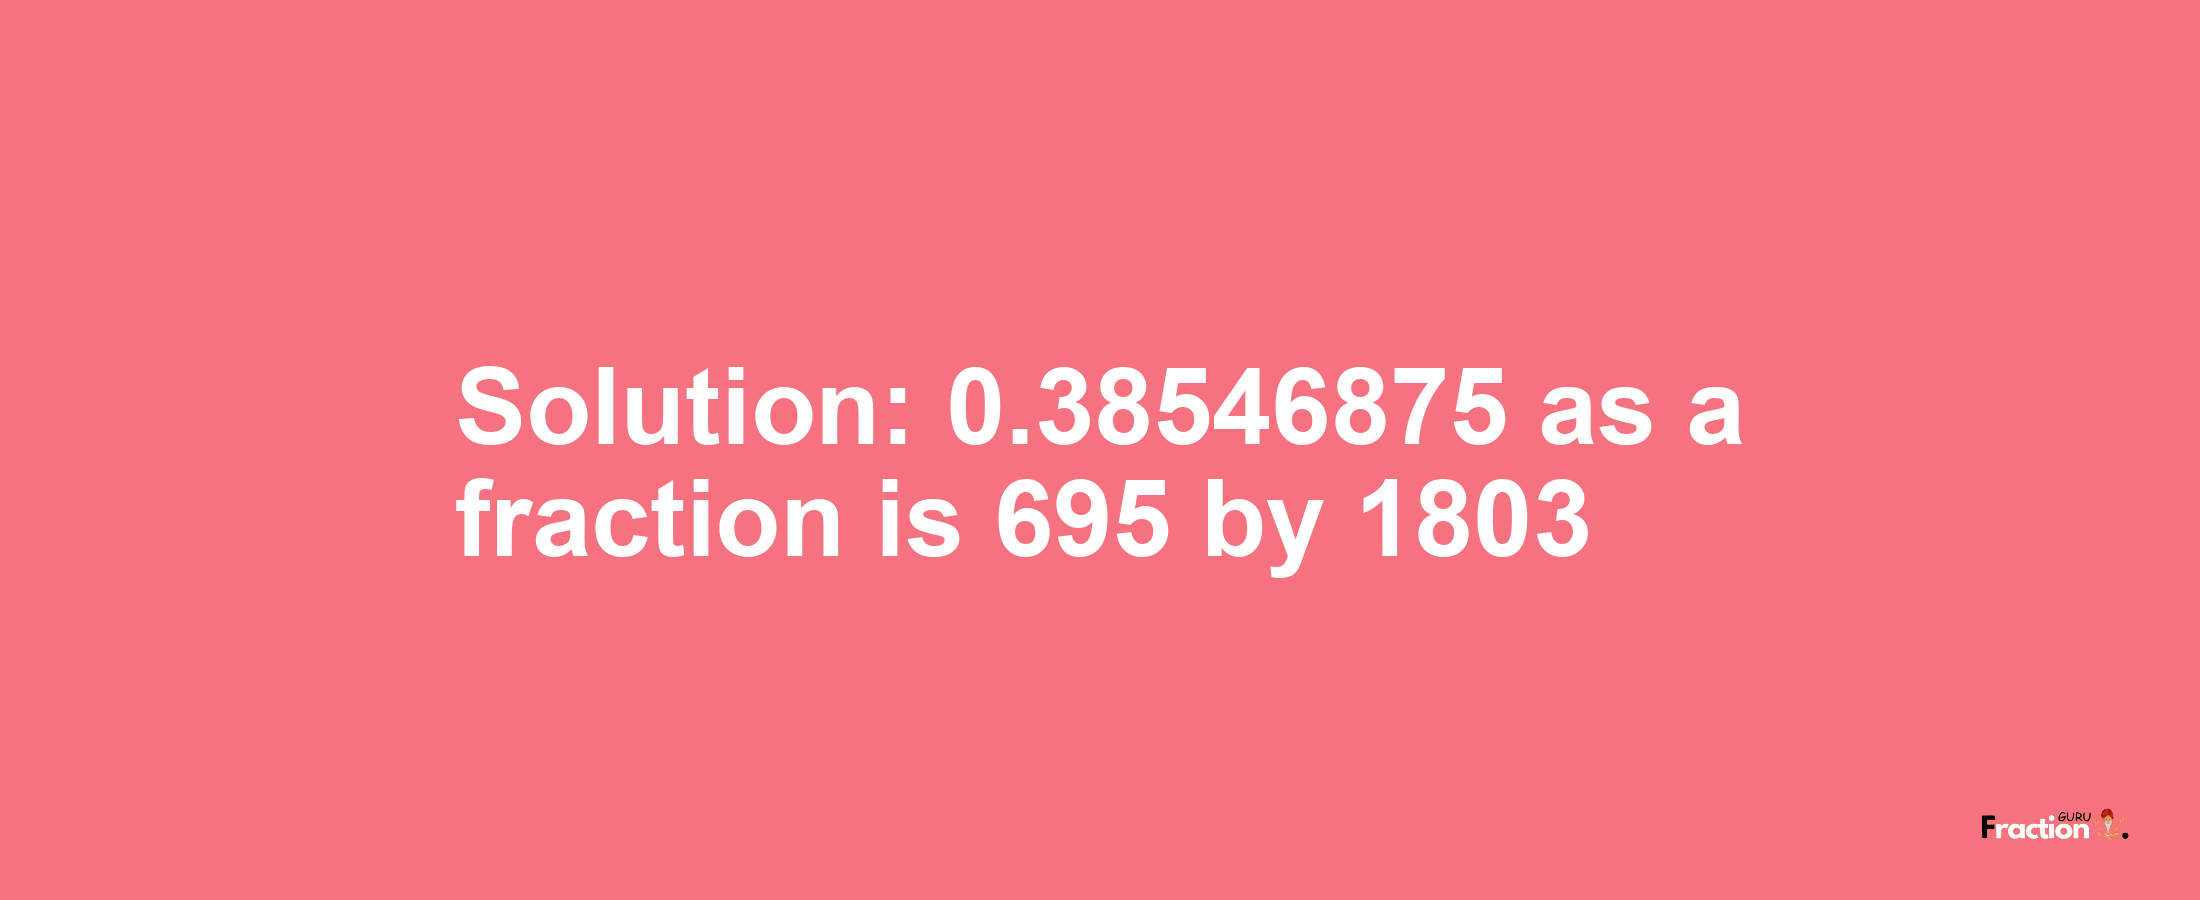 Solution:0.38546875 as a fraction is 695/1803